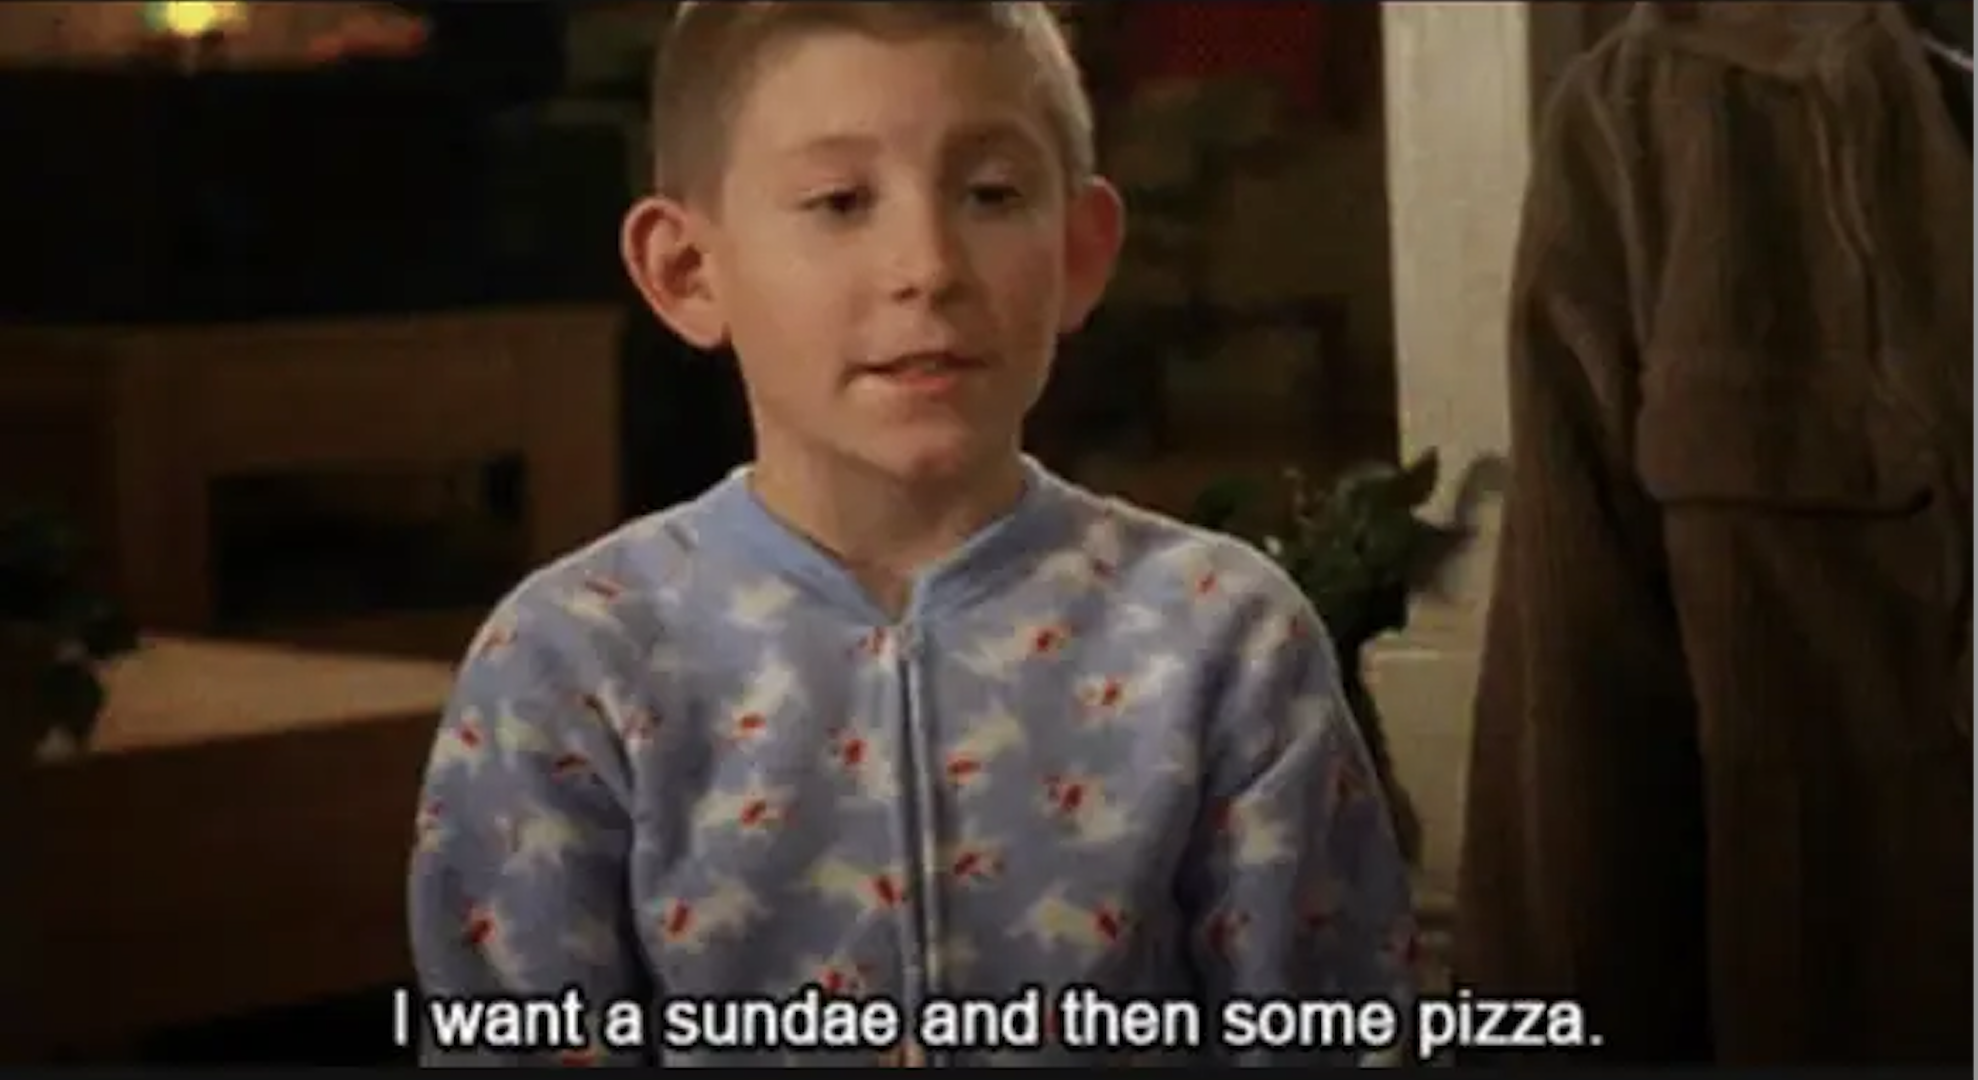 Dewey from &quot;Malcolm in the Middle&quot; saying &quot;I want a sundae and then some pizza&quot;